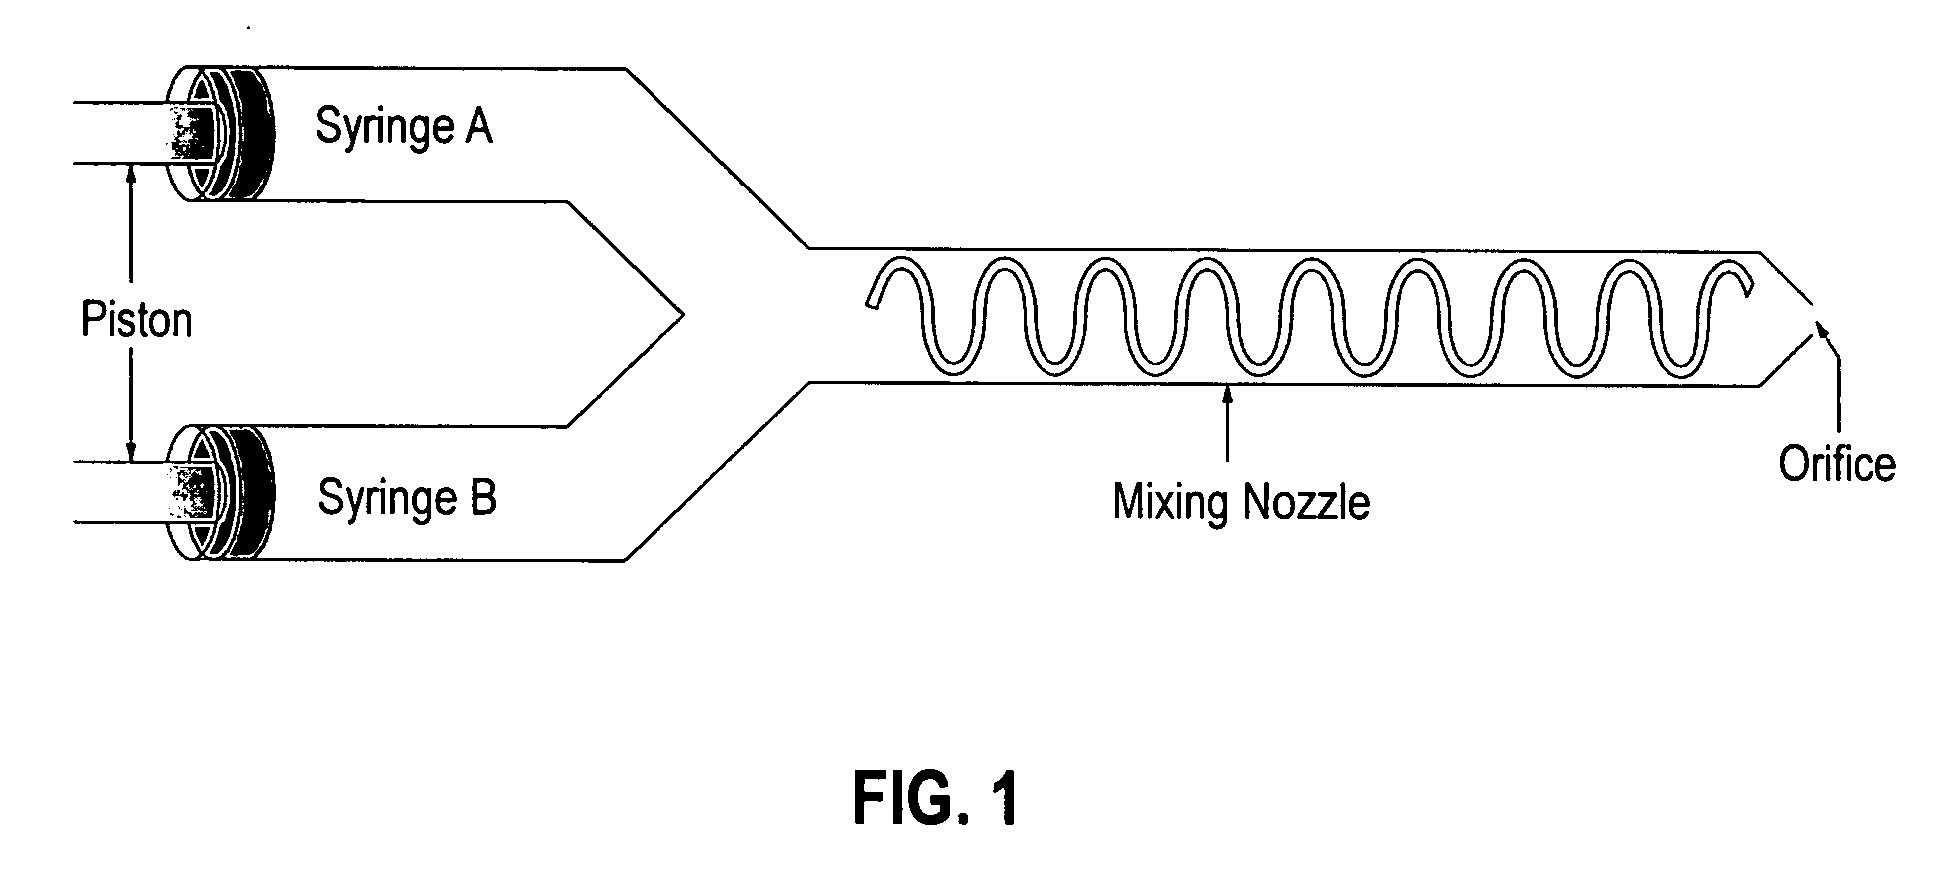 Bioadhesive delivery system for transmucosal delivery of beneficial agents